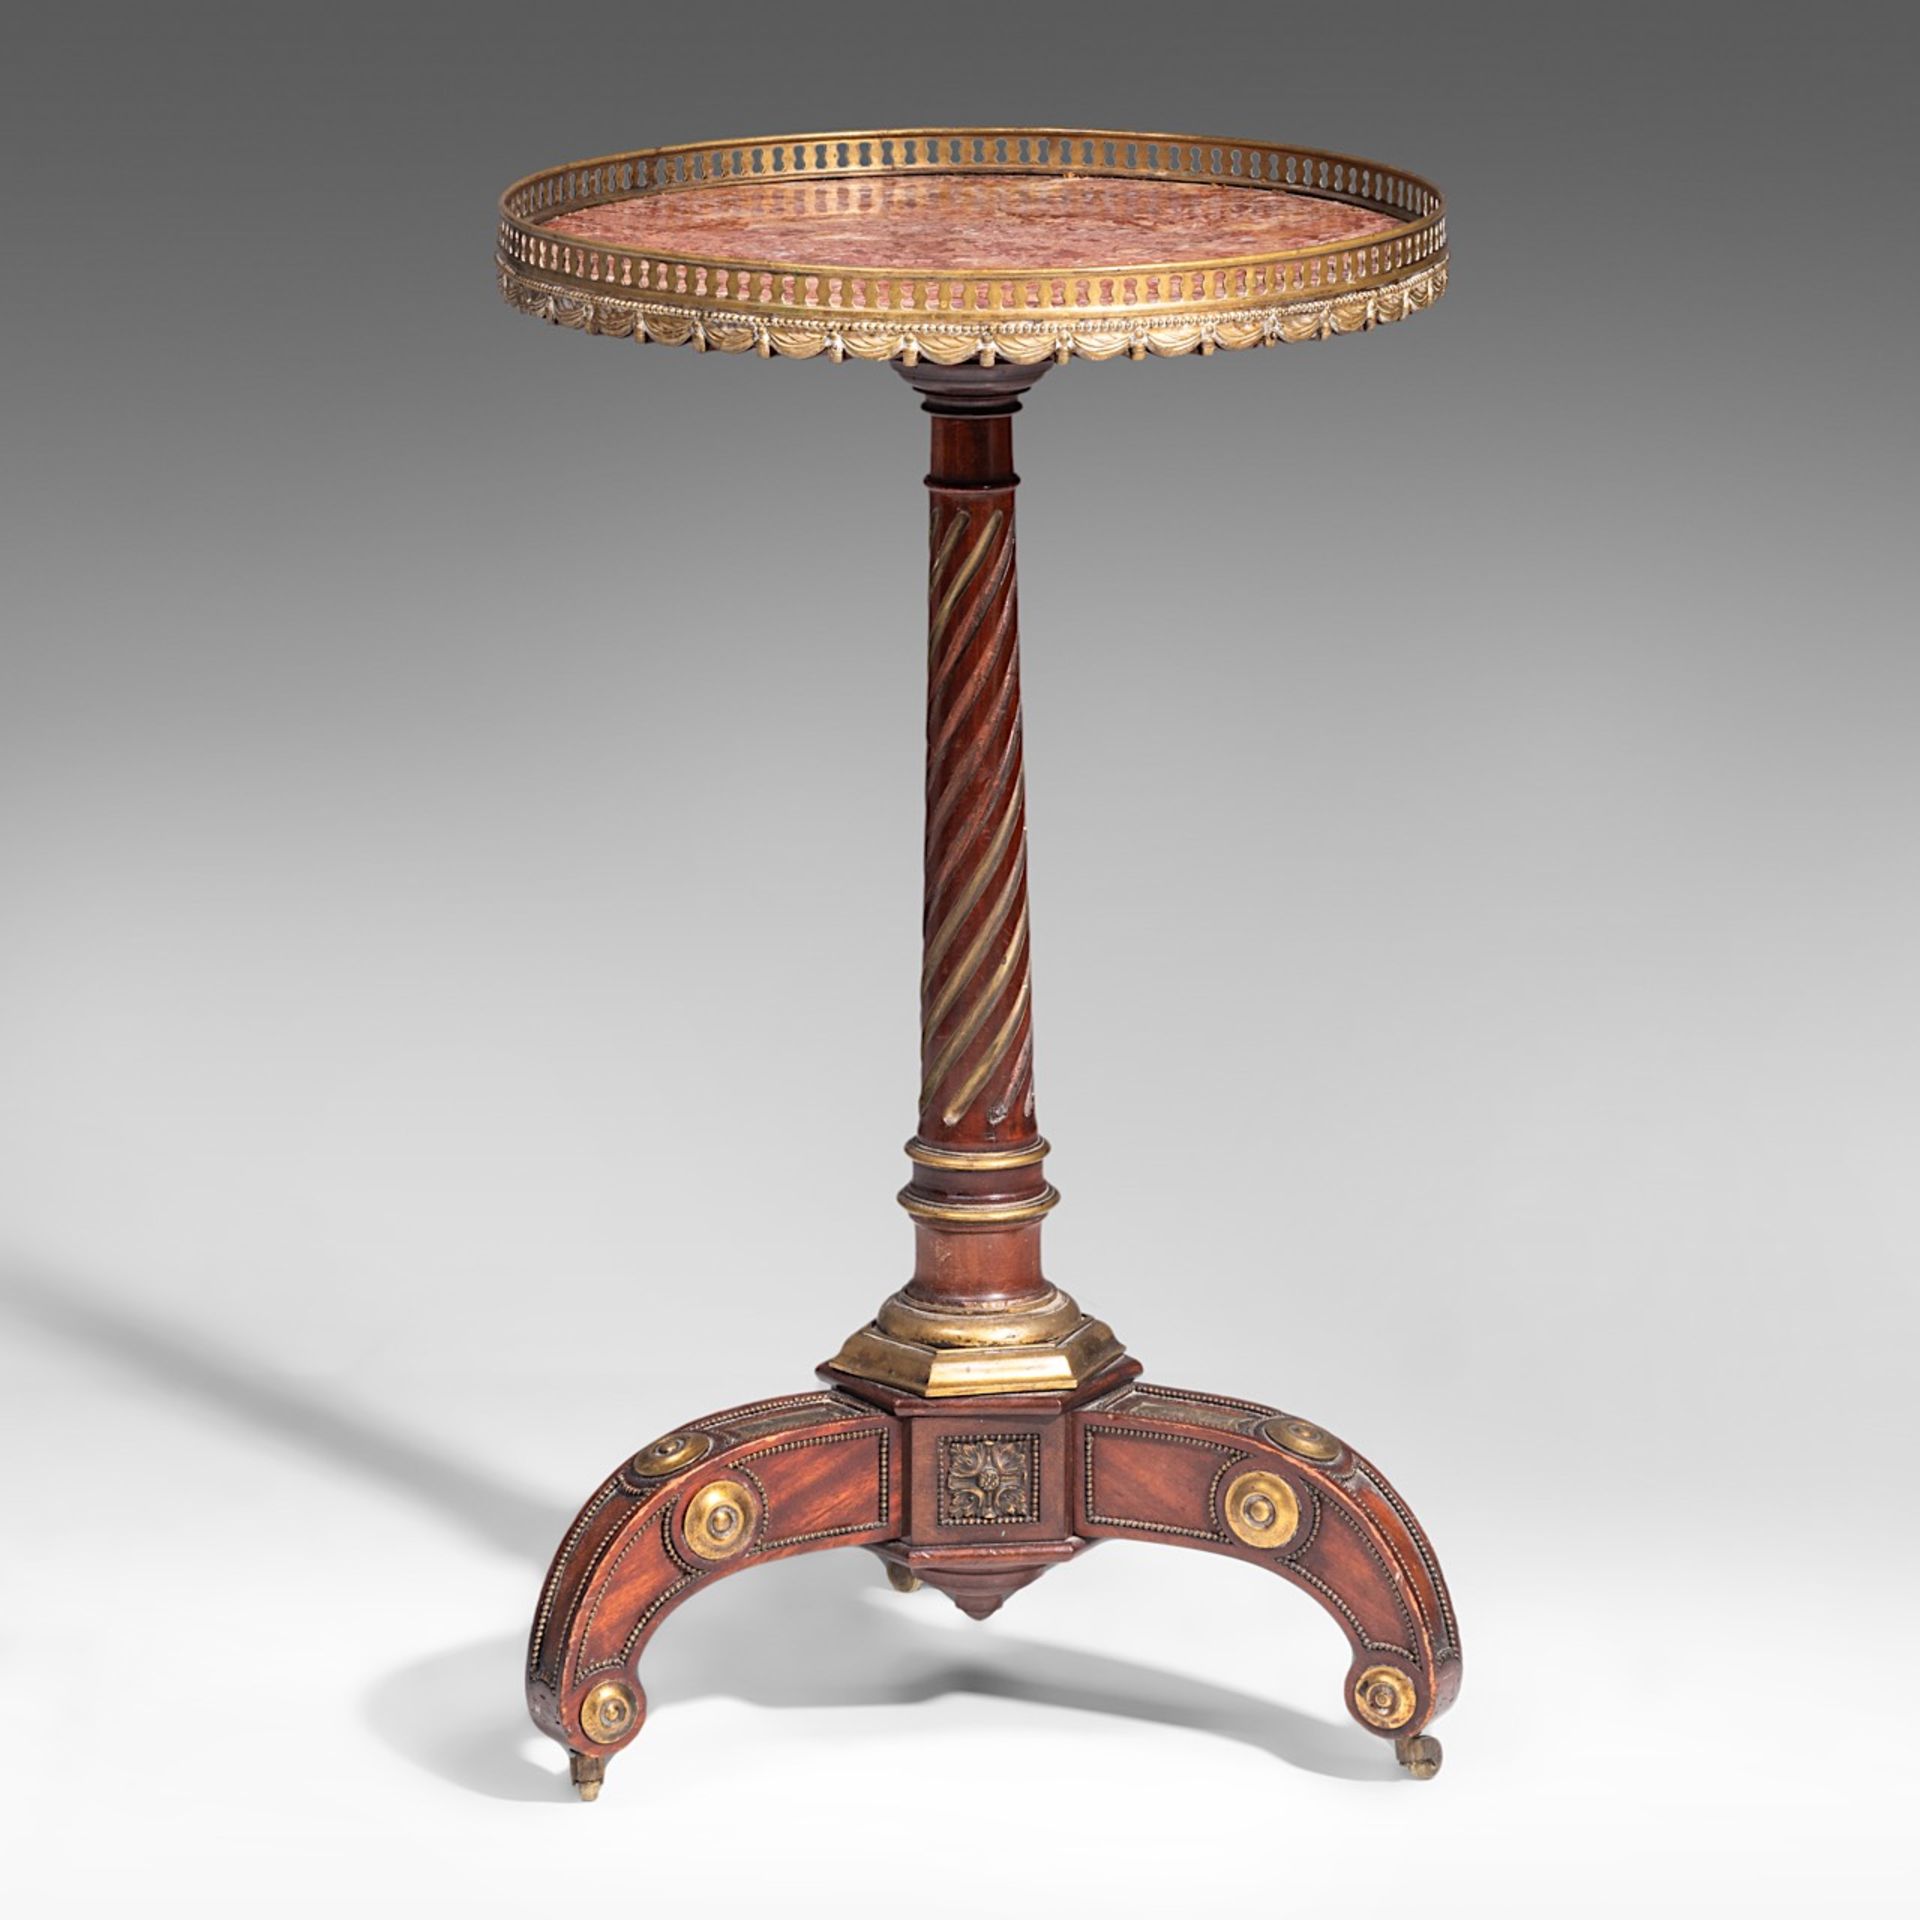 A fine Louis XVI mahogany gueridon attributed to Charles Erdman Richter, H 76 - dia 45 cm - Image 3 of 4